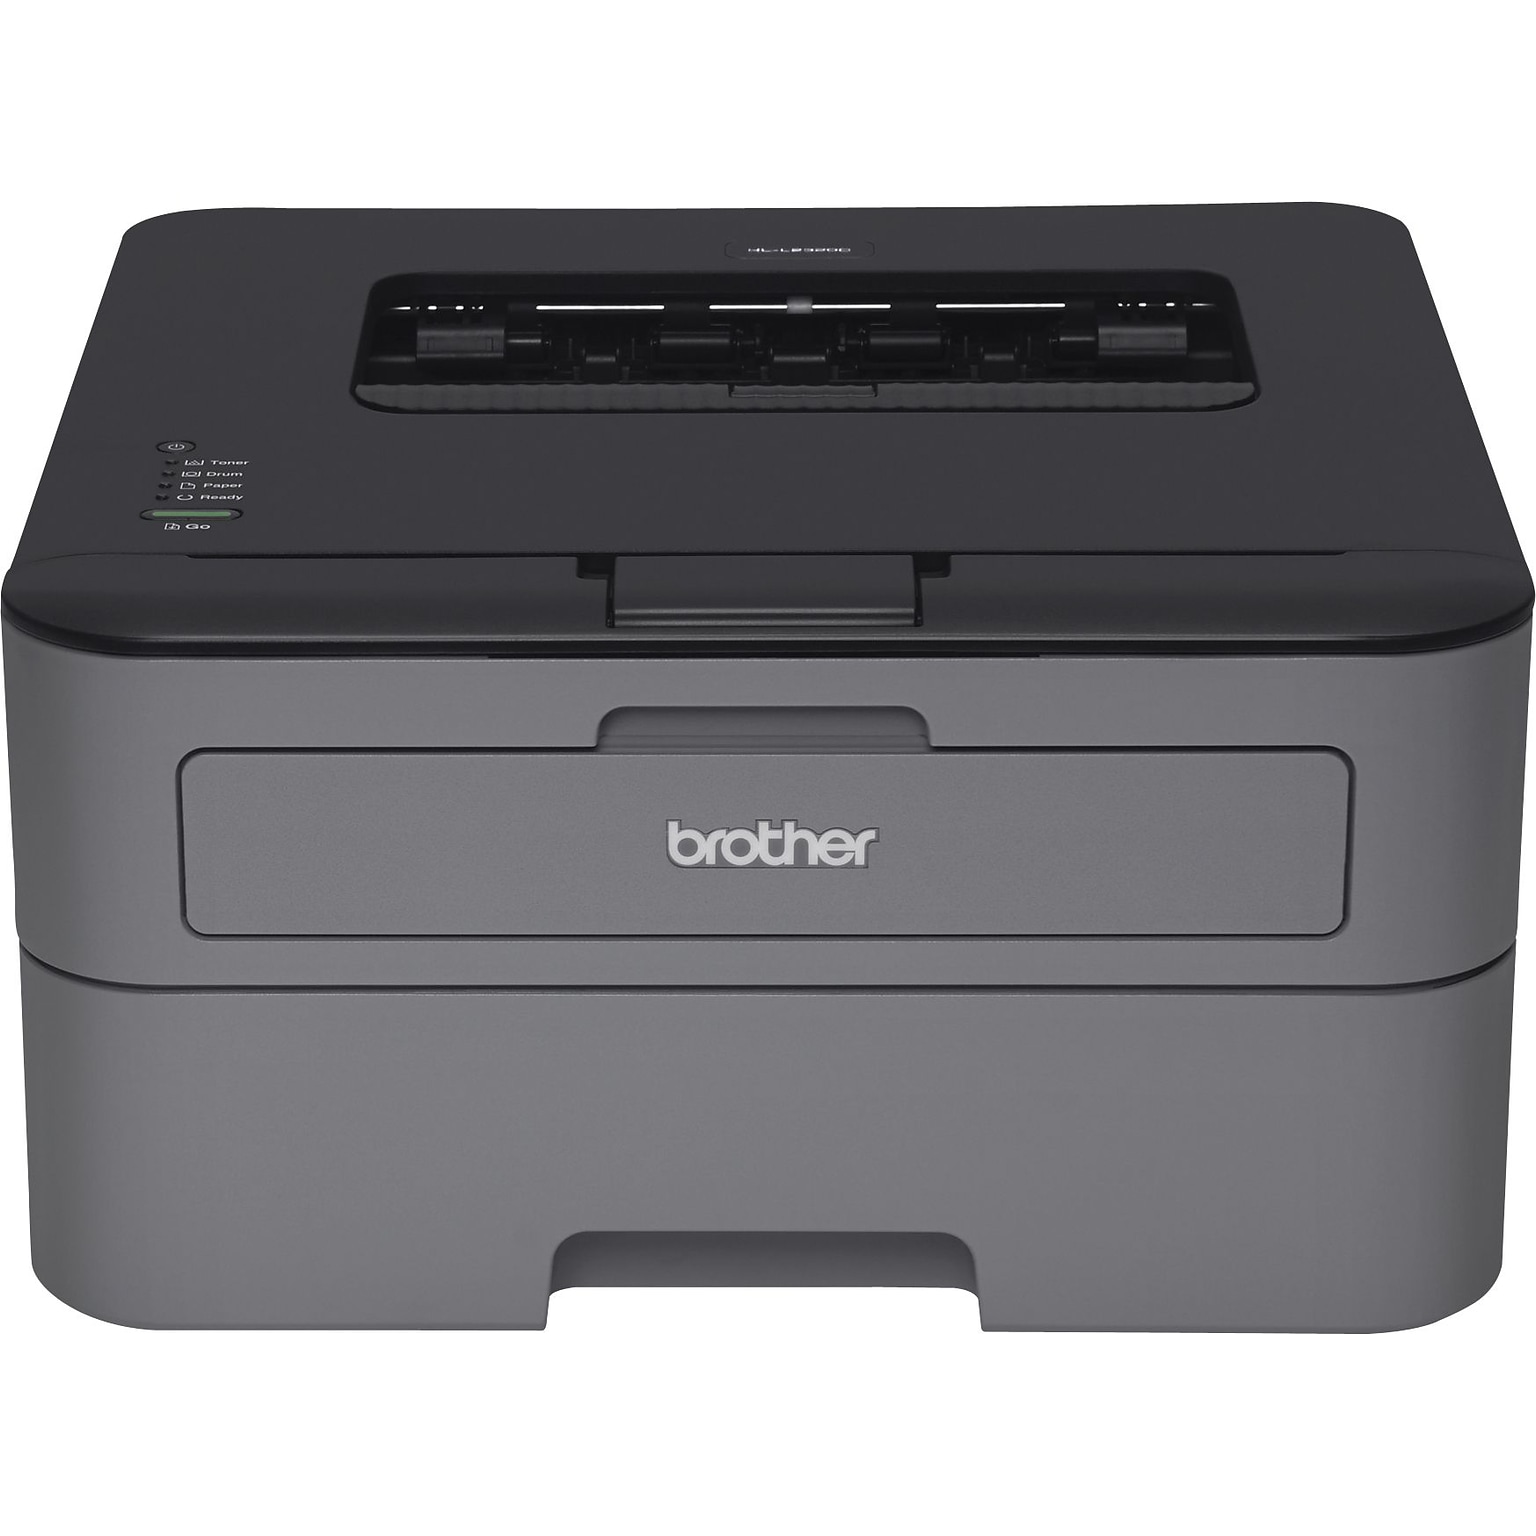 Brother HLL2320D Single-Function Monochrome Laser Printer with Duplex